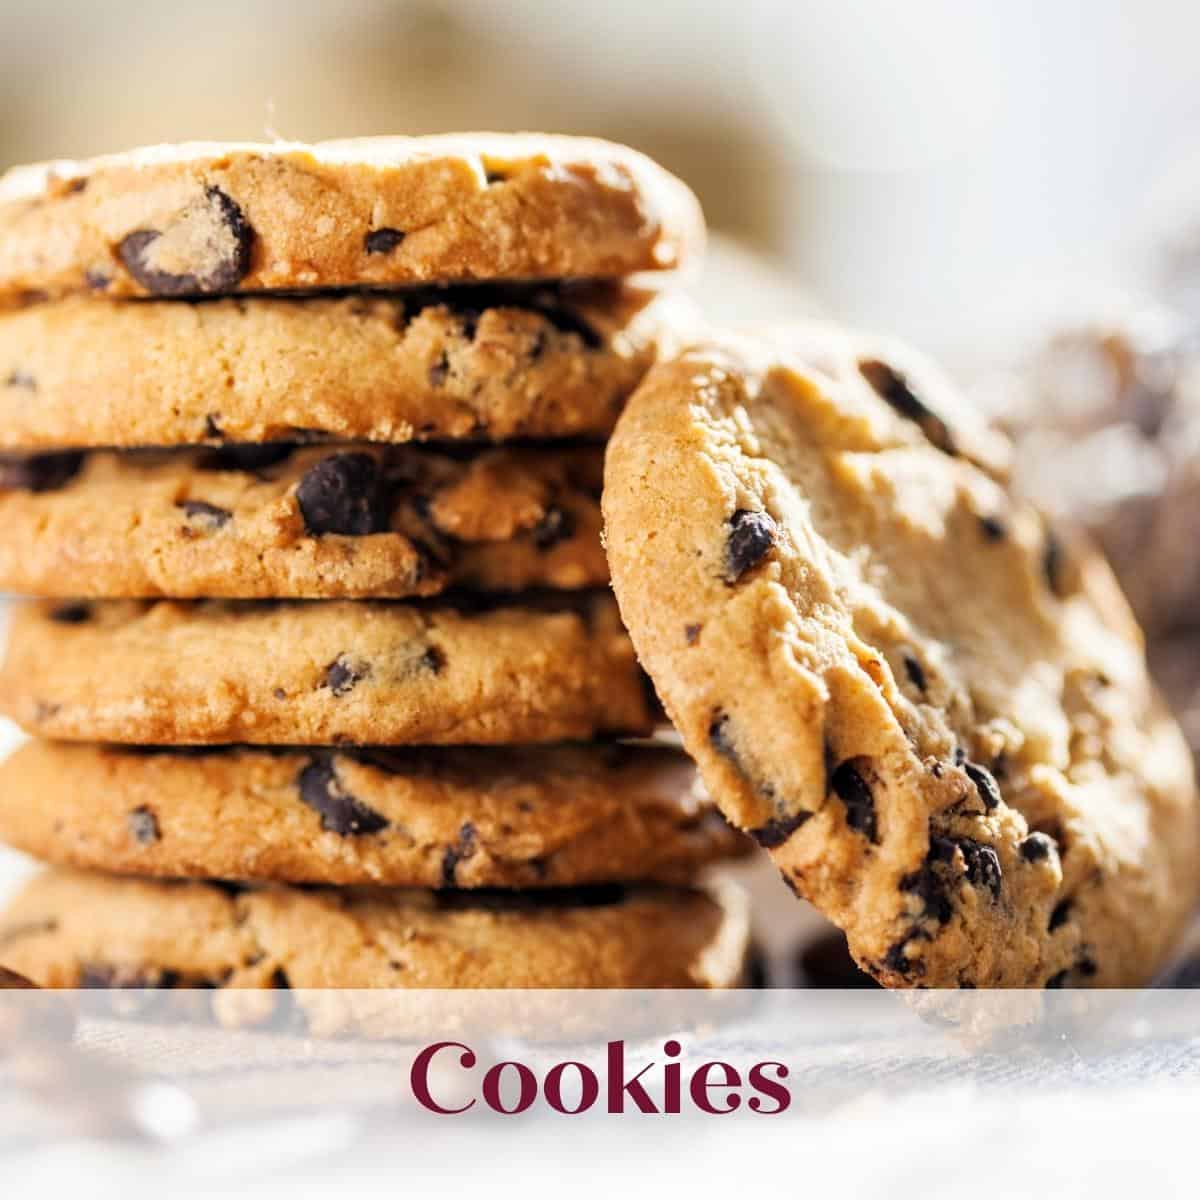 Cookie category graphic with chocolate chip cookies.